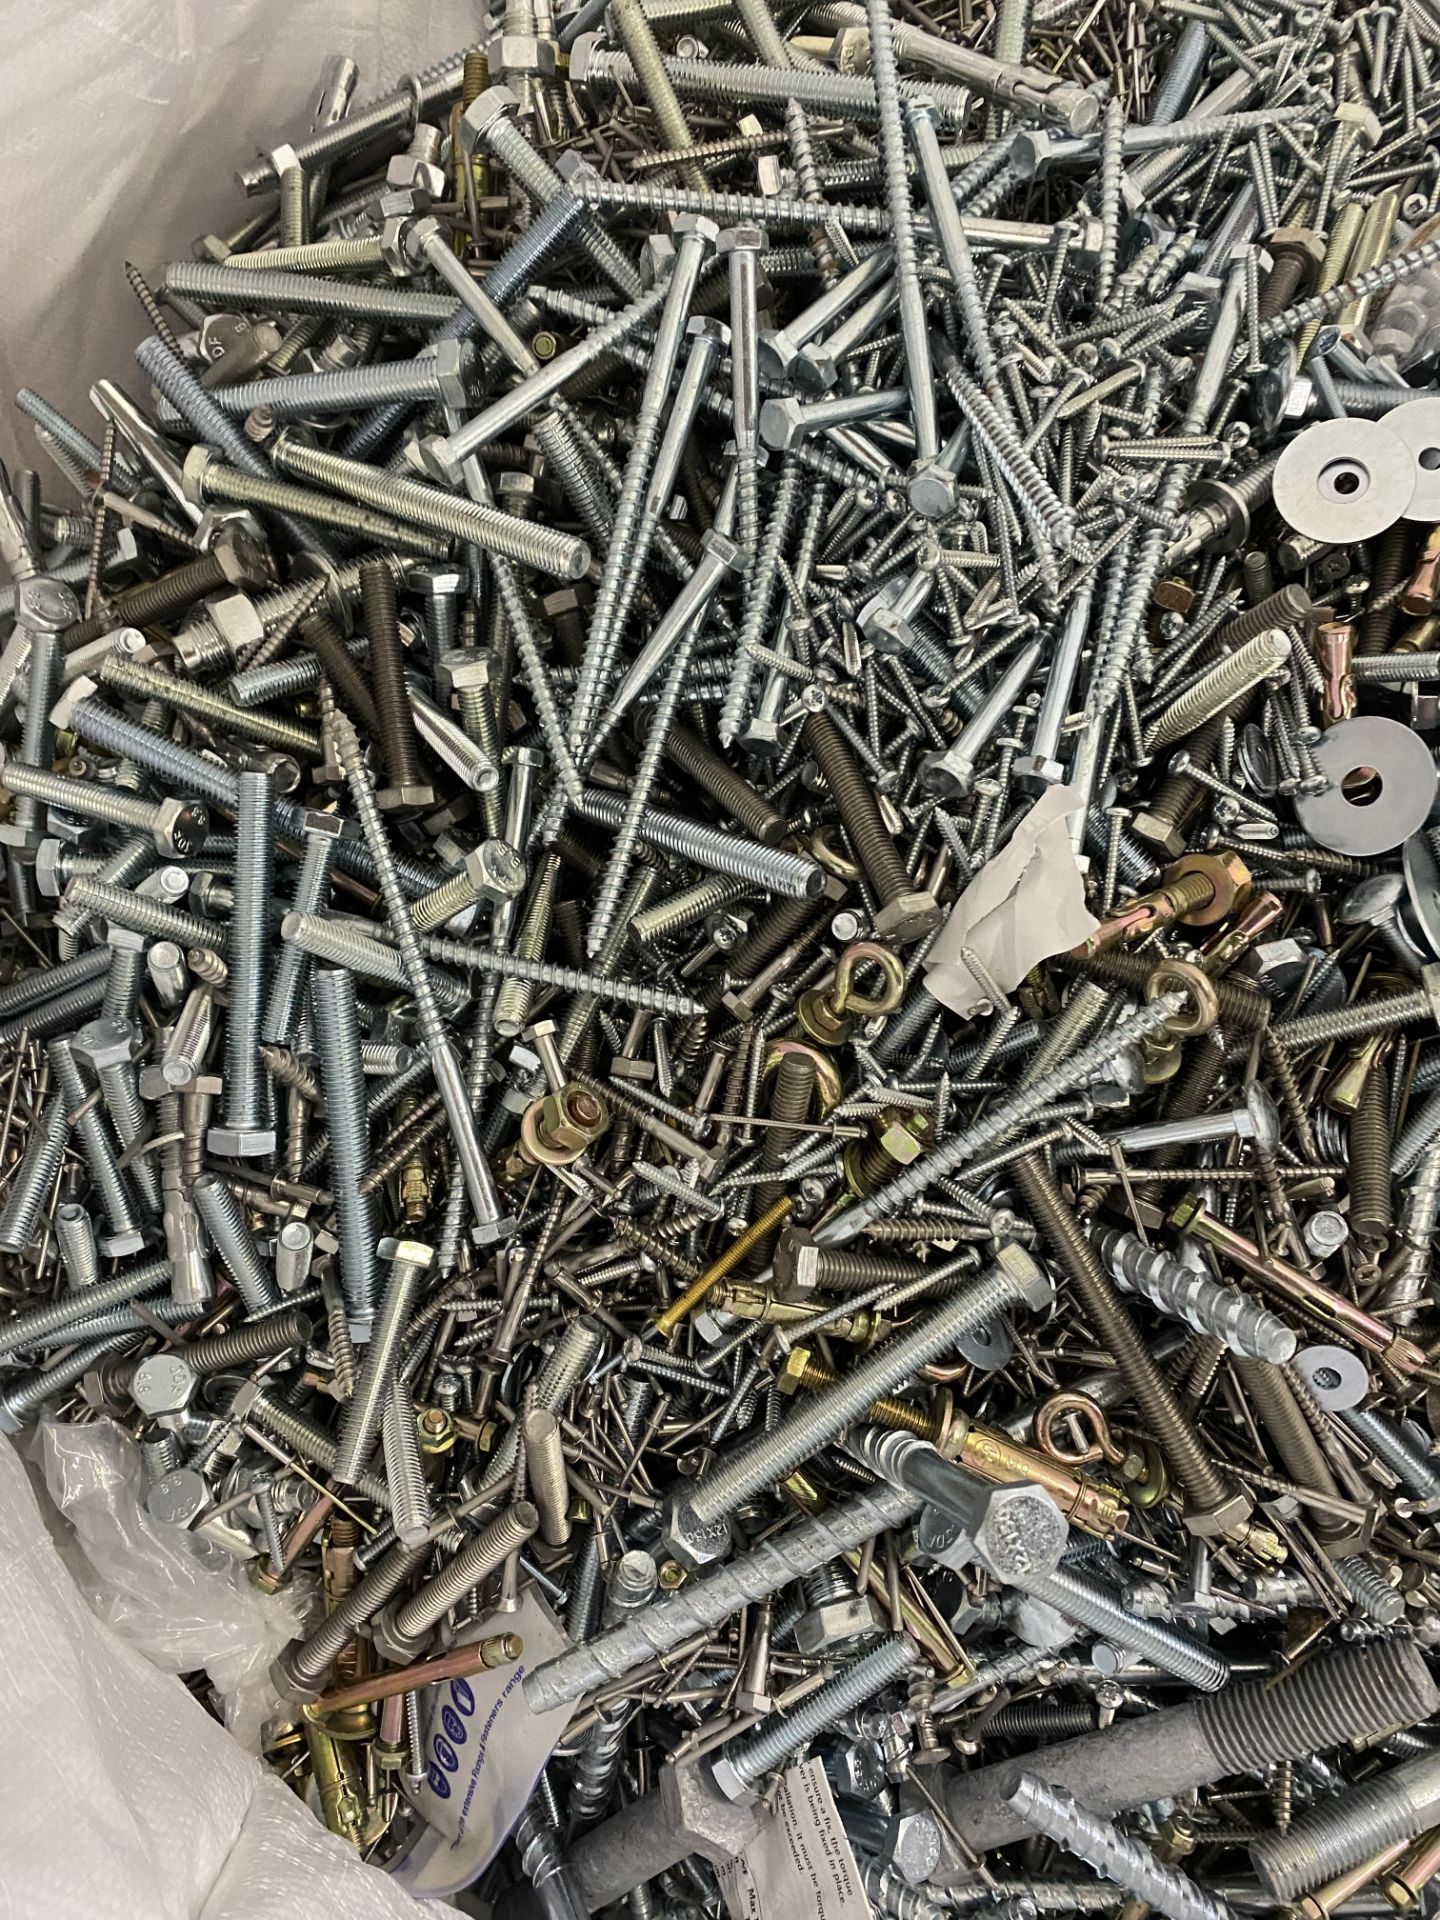 Approximately 250kg Bag Of Various loose Screws, Nuts, Bolts And Washers - Image 3 of 9